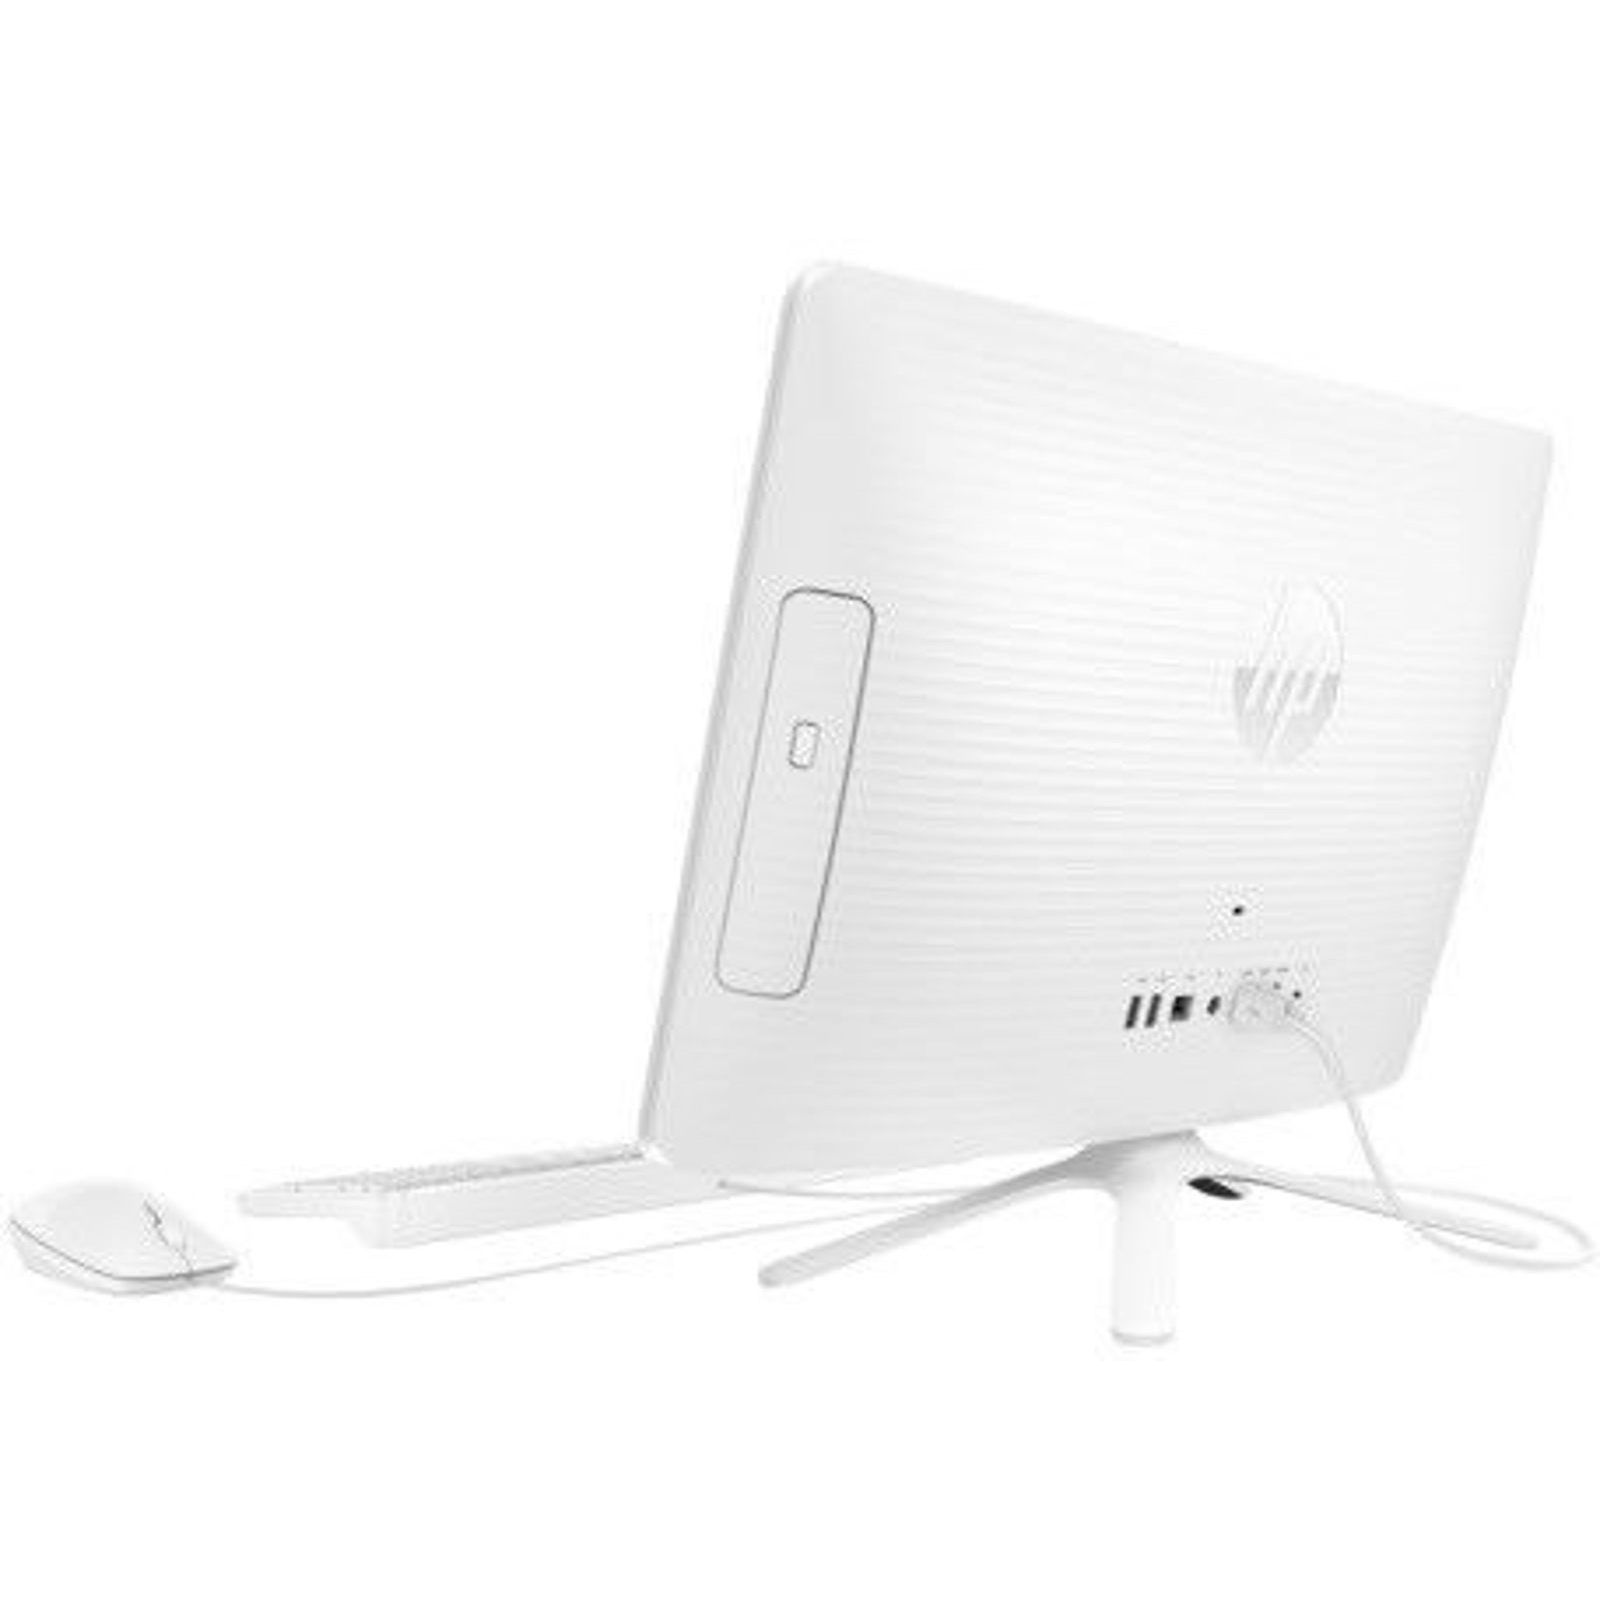 HP 2BV24EA 22-B309NT I5-7200U 4GB 1TB O/B VGA 21.5" NONTOUCH FREEDOS BEYAZ ALL IN ONE PC